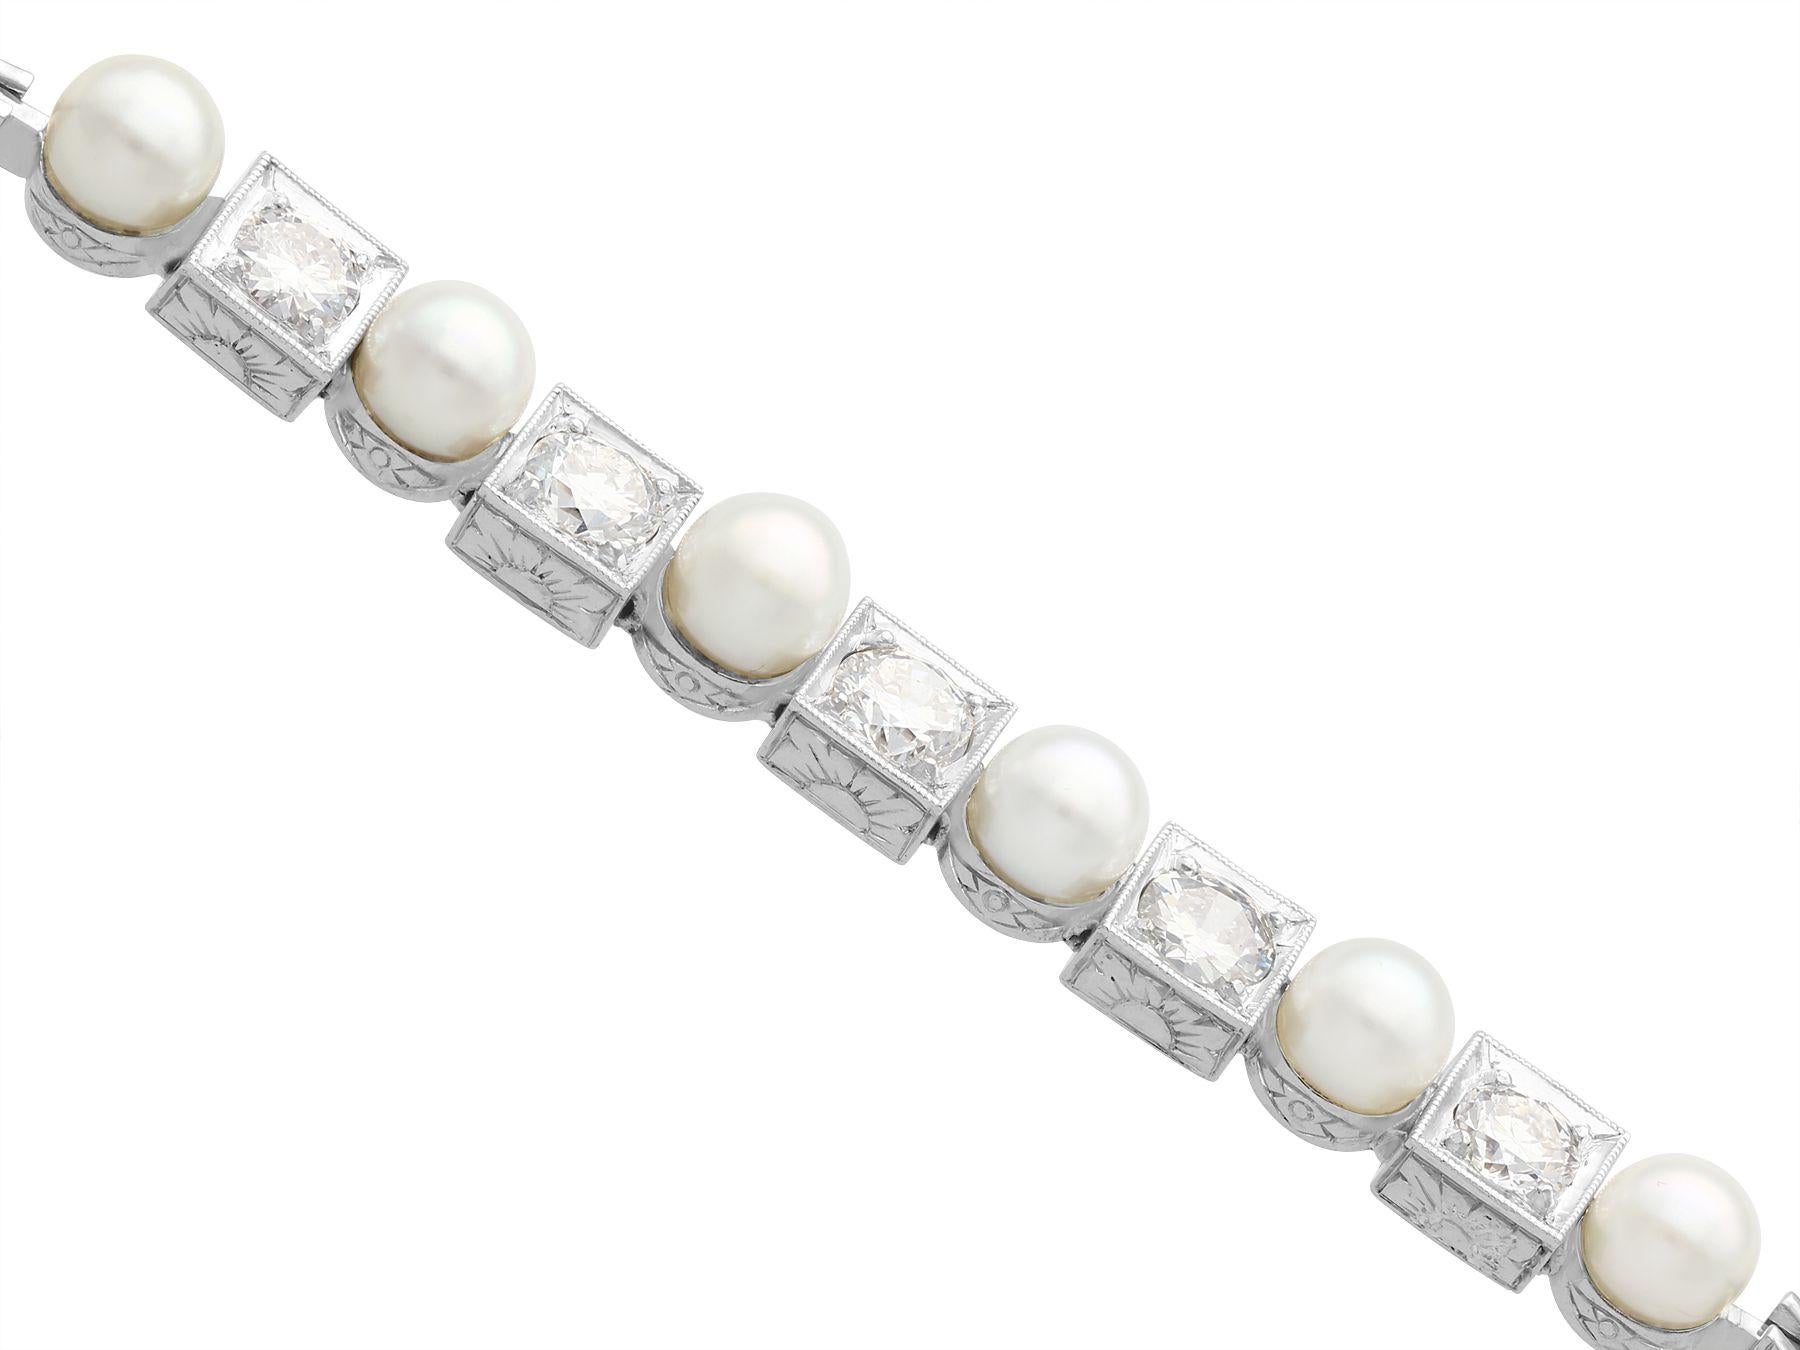 1930s Antique 1.38 Carat Diamond and Cultured Pearl White Gold Bracelet In Excellent Condition For Sale In Jesmond, Newcastle Upon Tyne